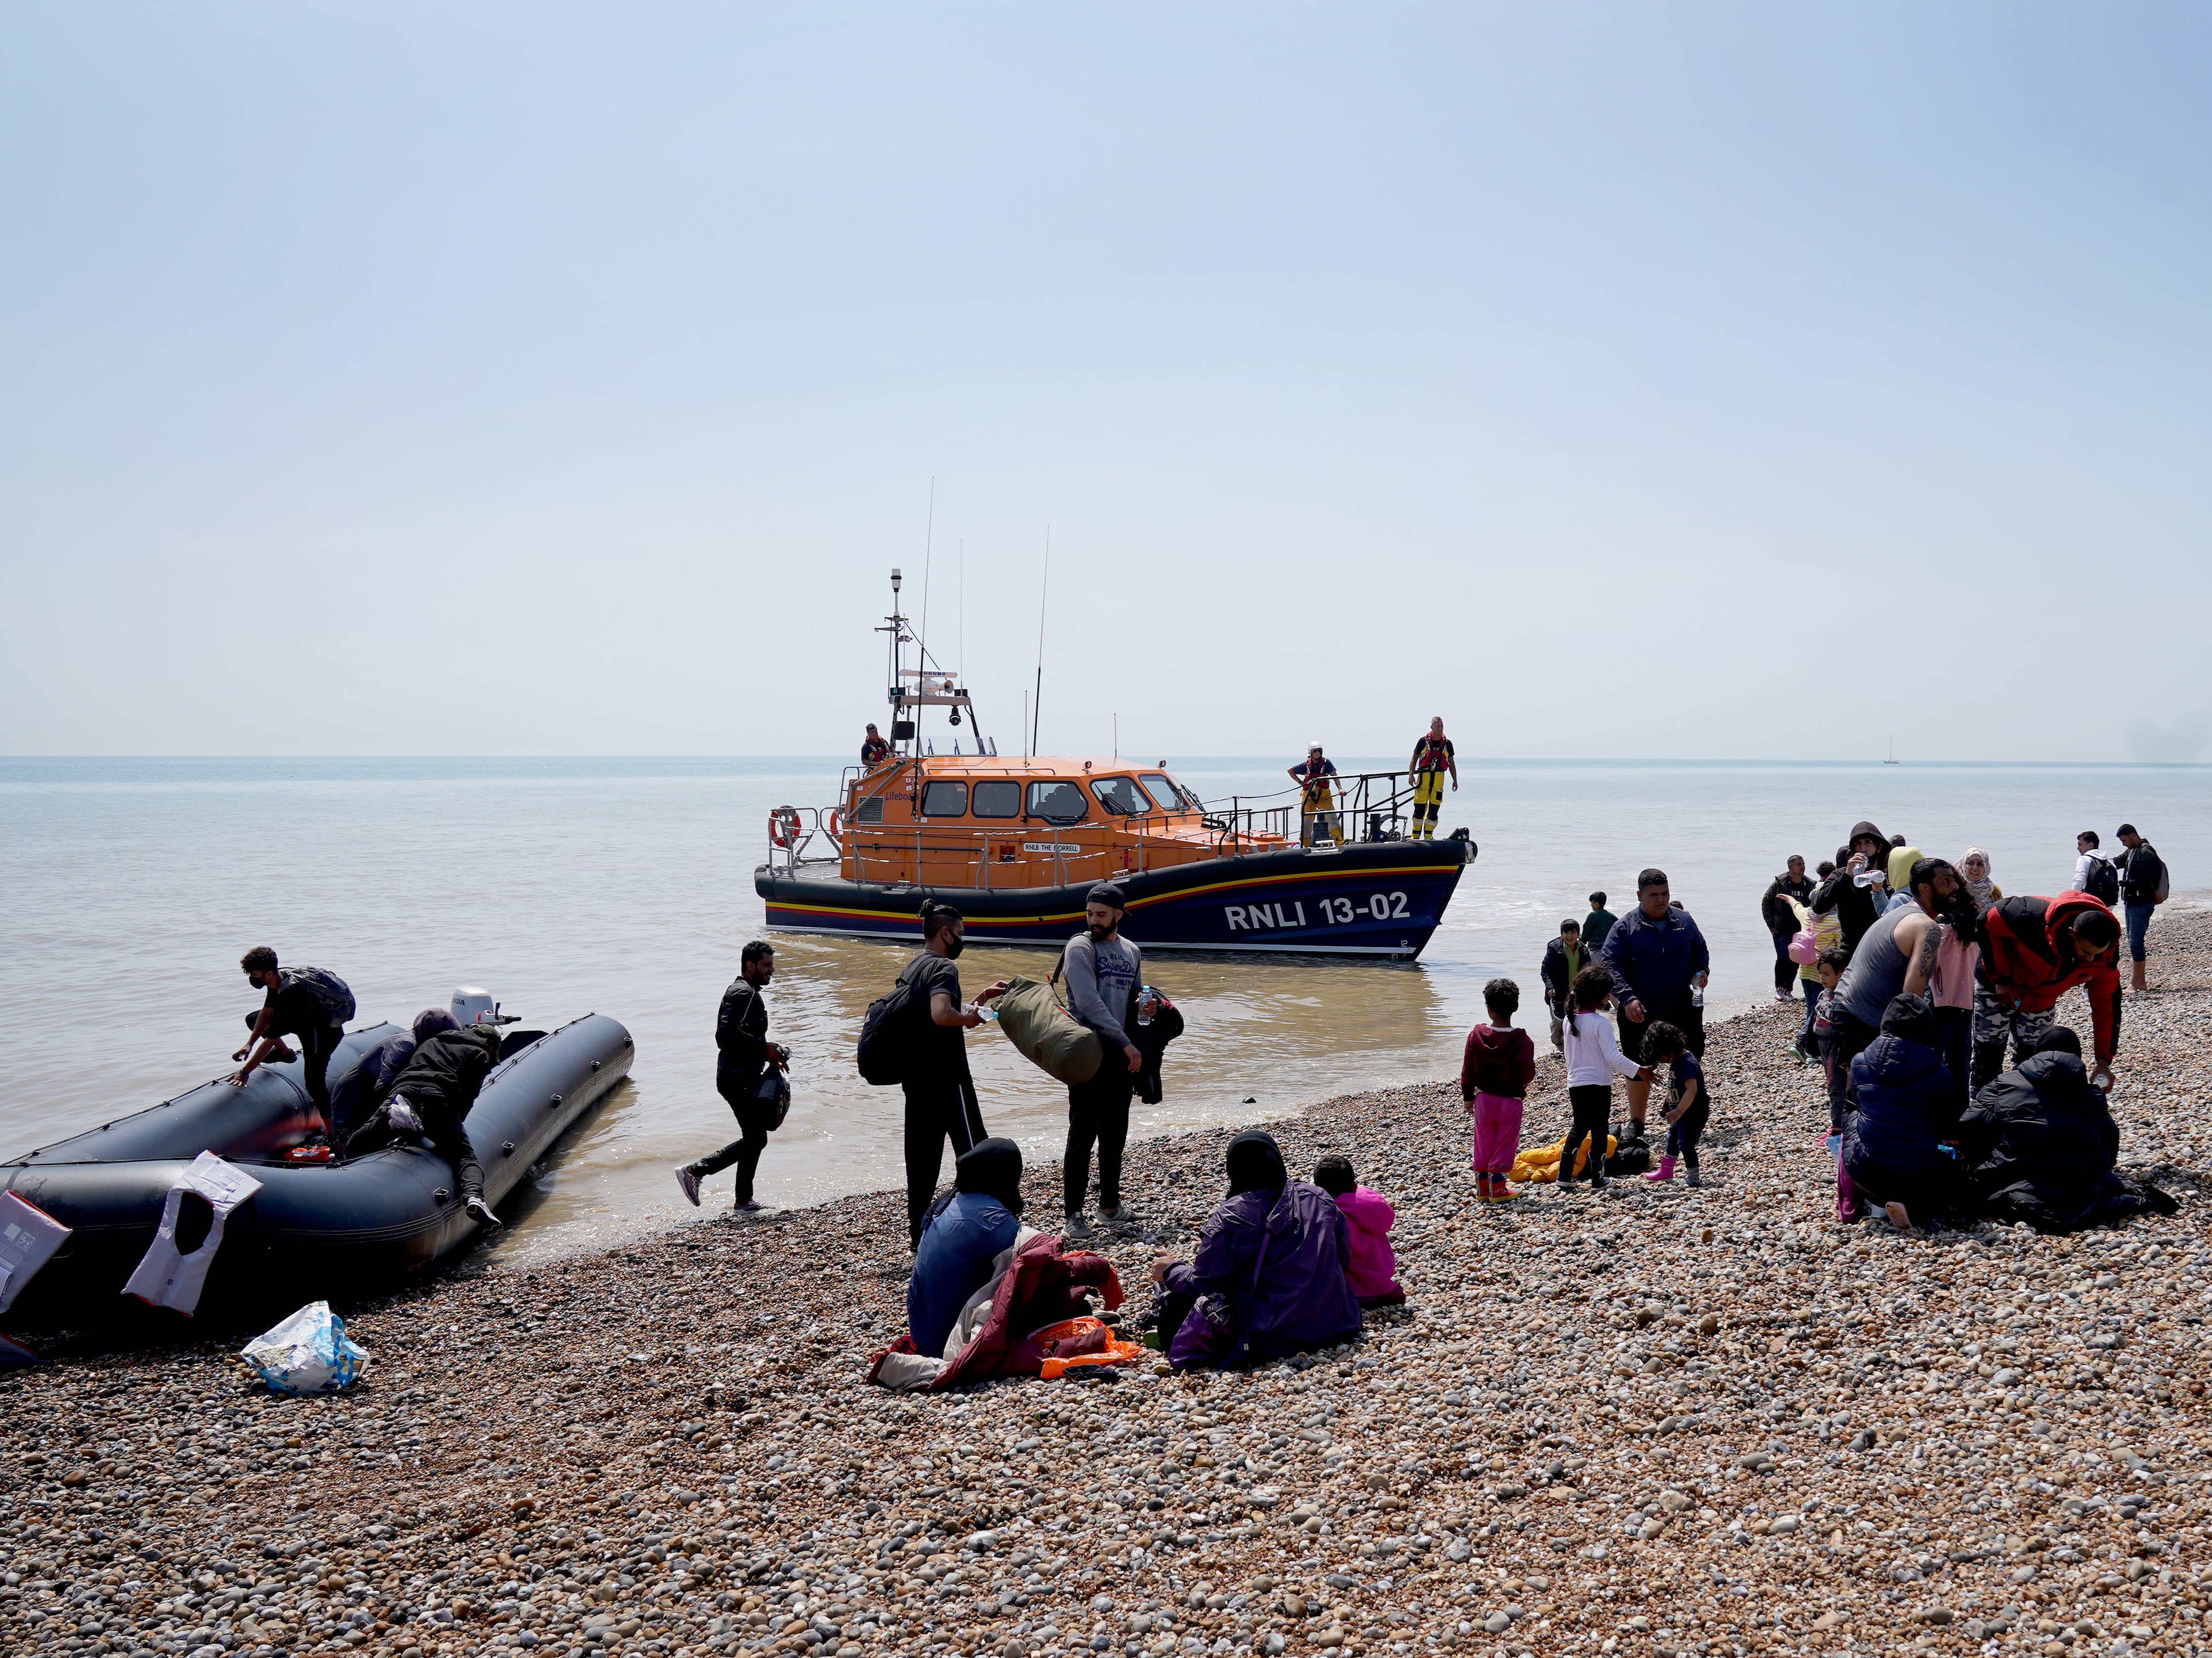 Migrants land on the beach in Dungeness, Kent, on Monday afternoon